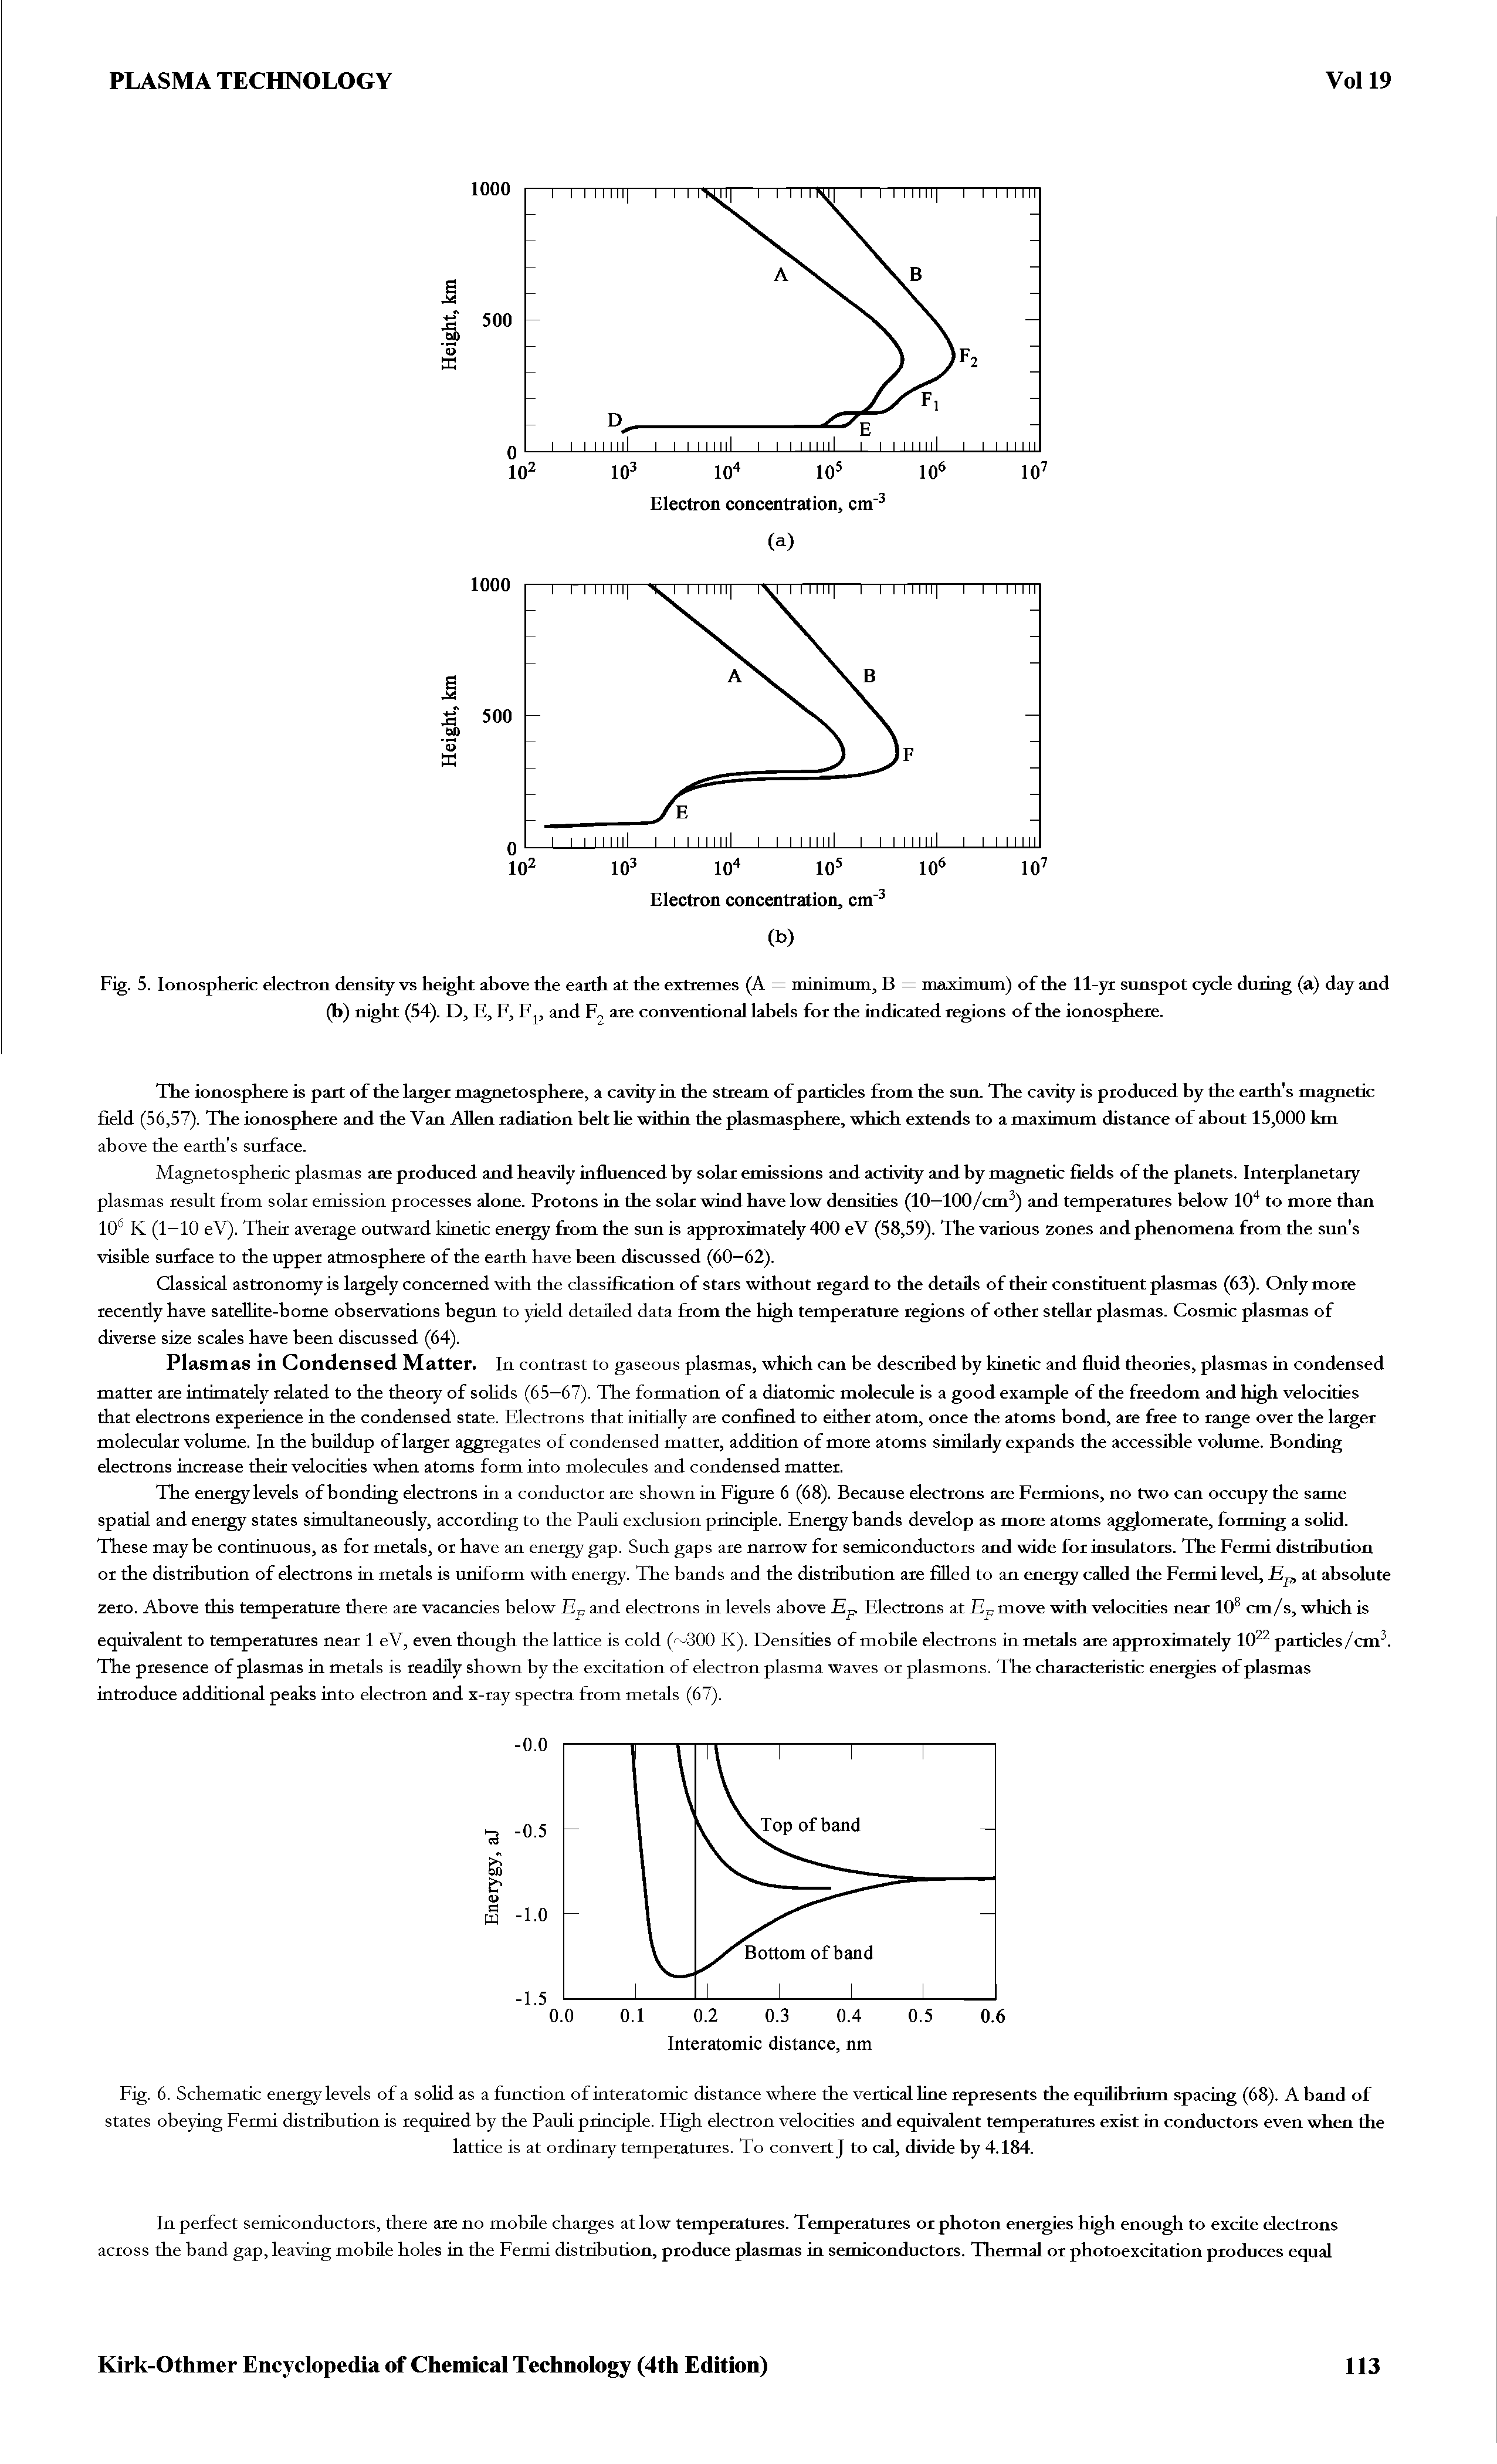 Fig. 6. Schematic energy levels of a solid as a function of interatomic distance where the vertical line represents the equilibrium spacing (68). A band of states obeying Fermi distribution is required by the Pauli principle. High electron velocities and equivalent temperatures exist in conductors even when the...